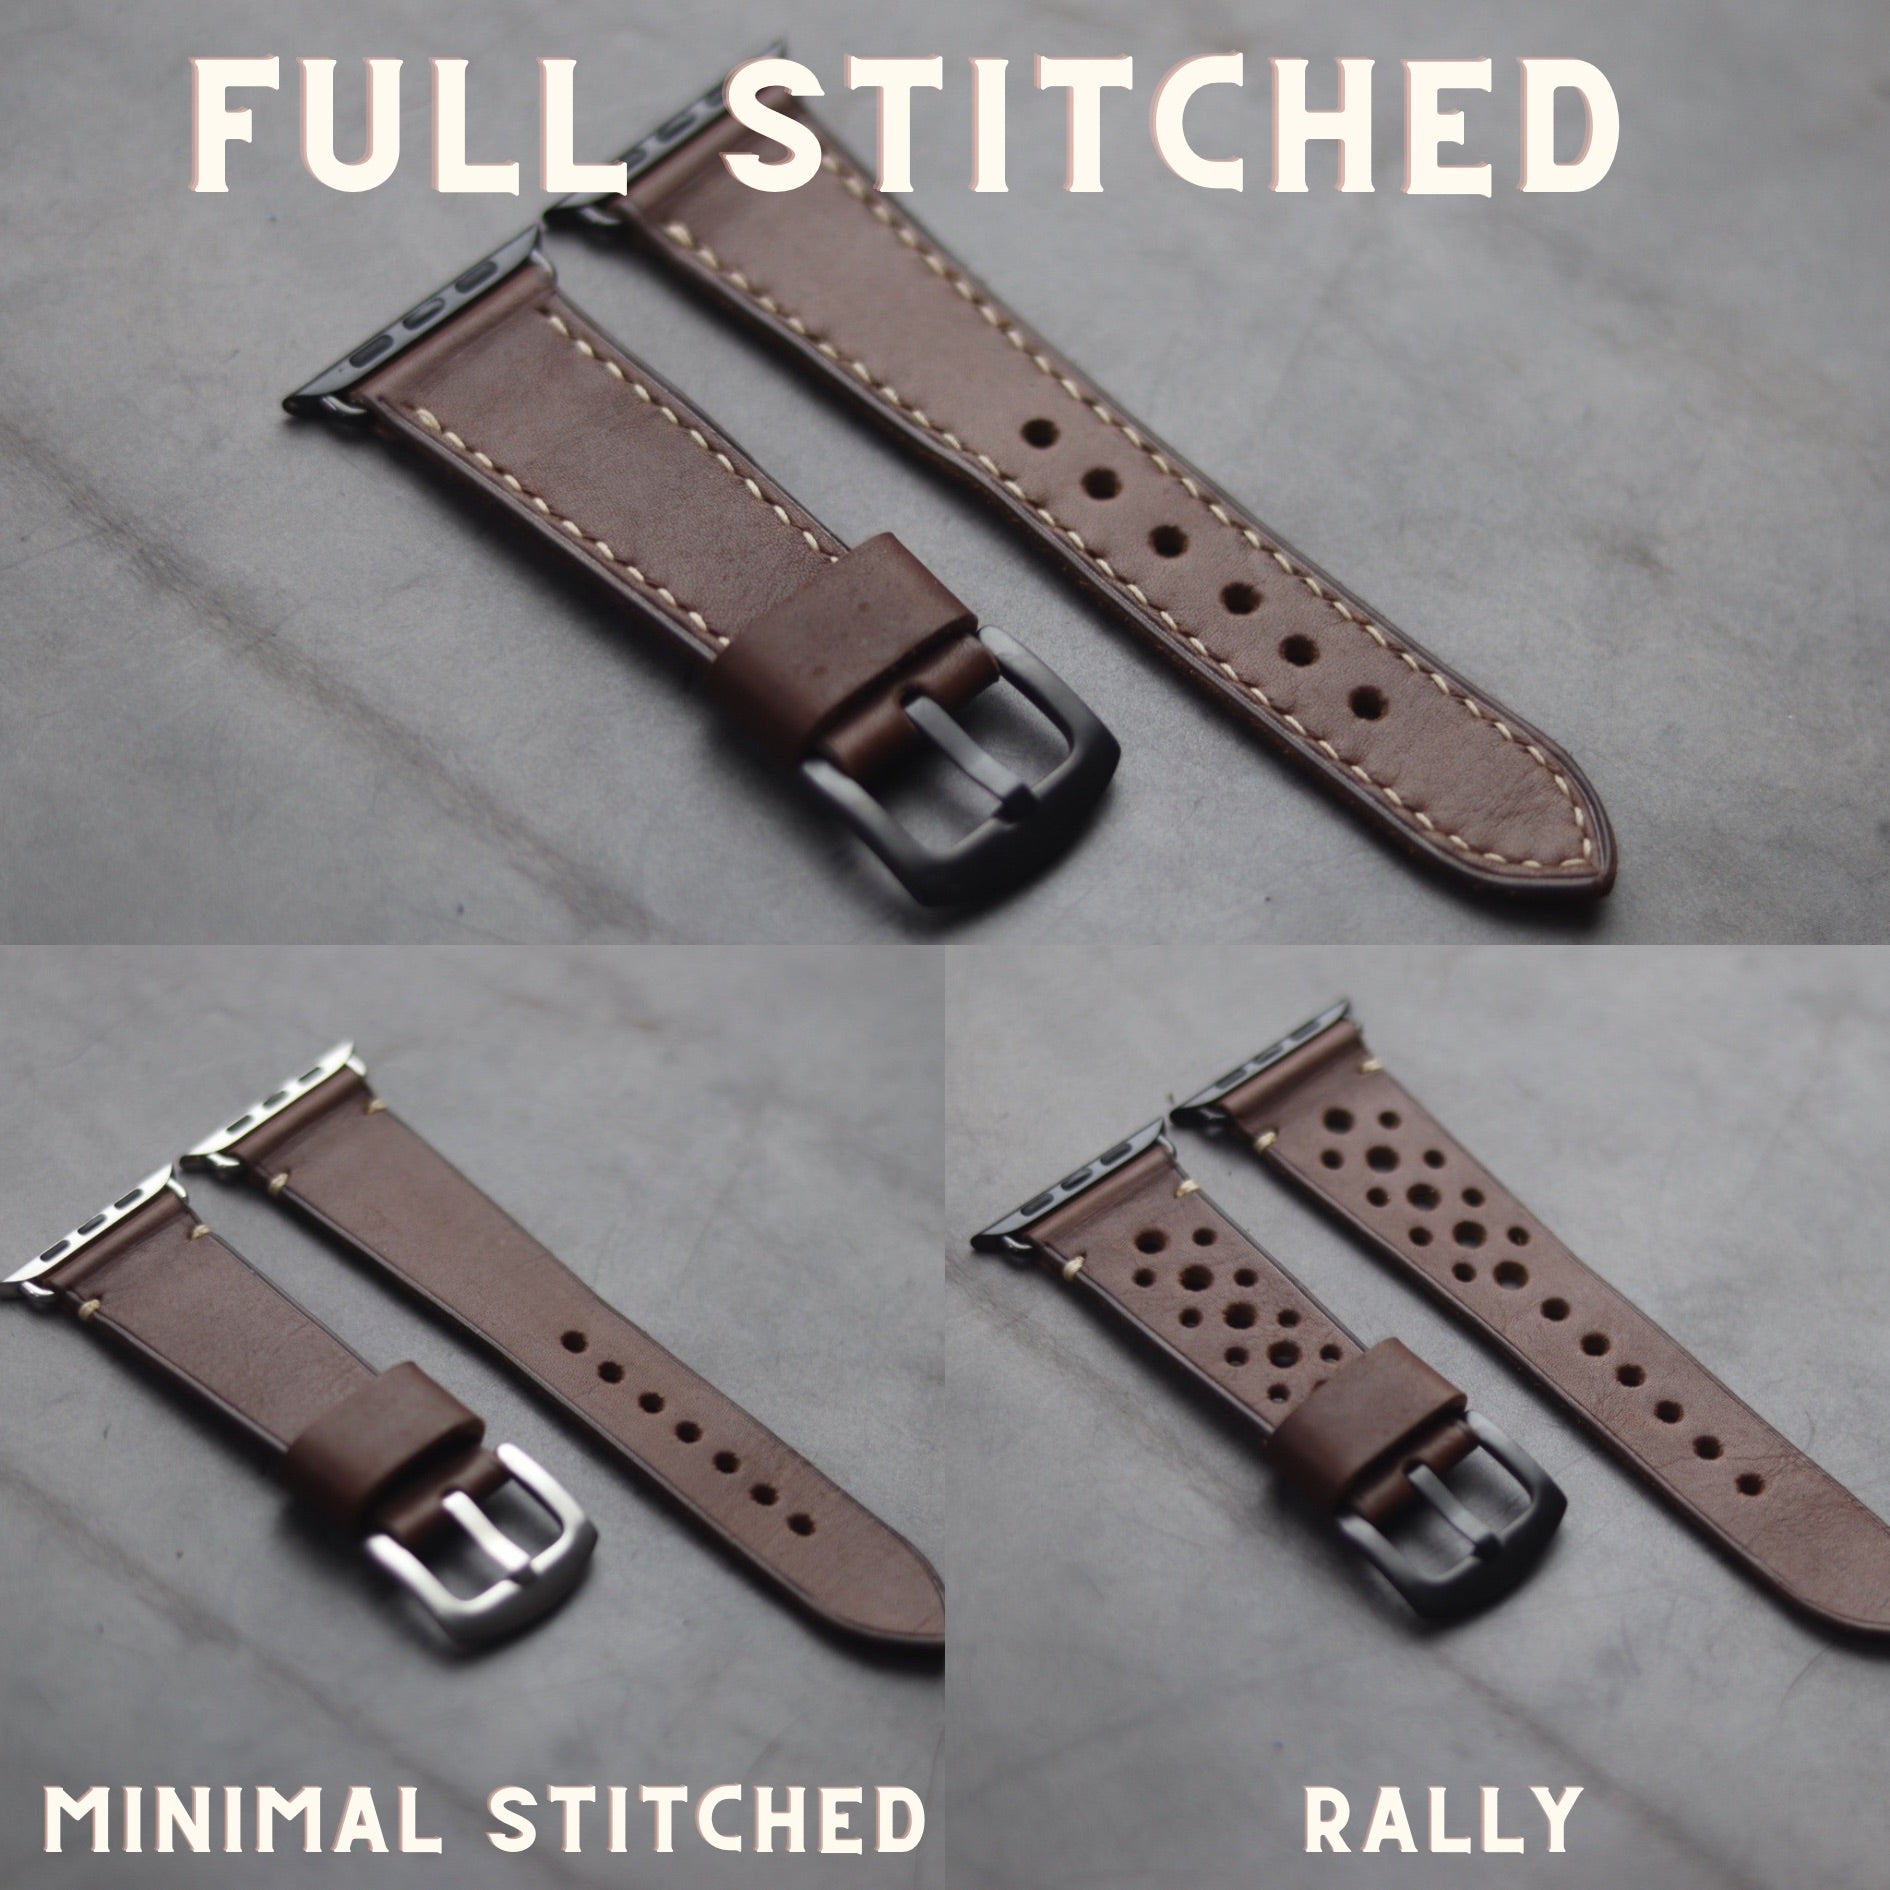 ONYX GREY LEATHER - APPLE WATCH STRAPS HAND-CRAFTED